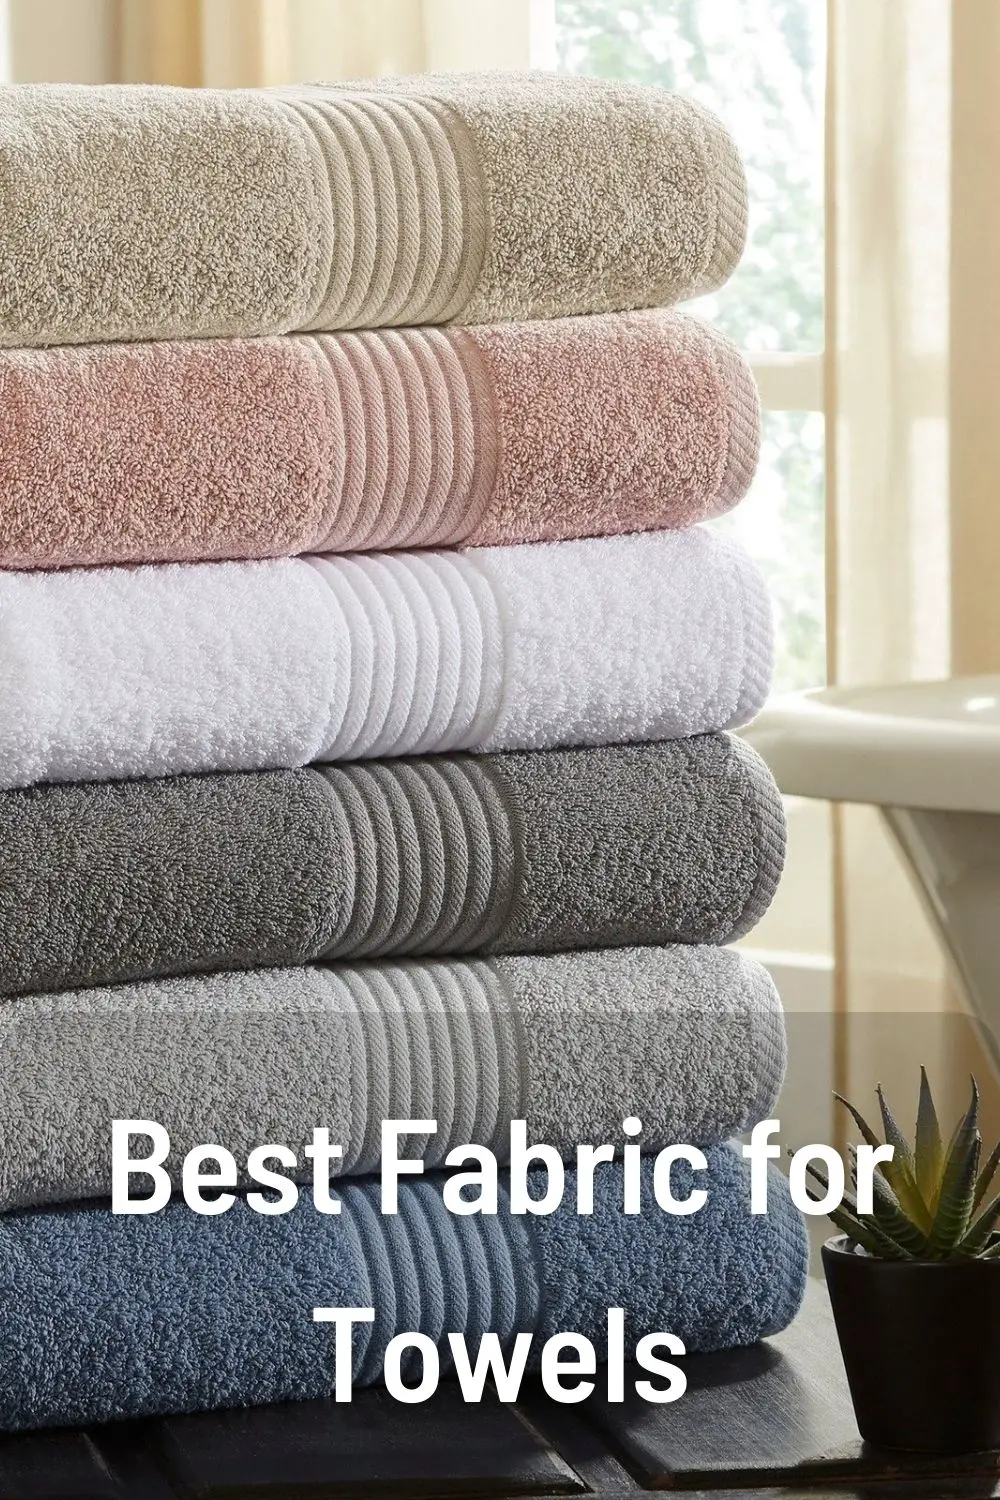 Best Fabric for Towels